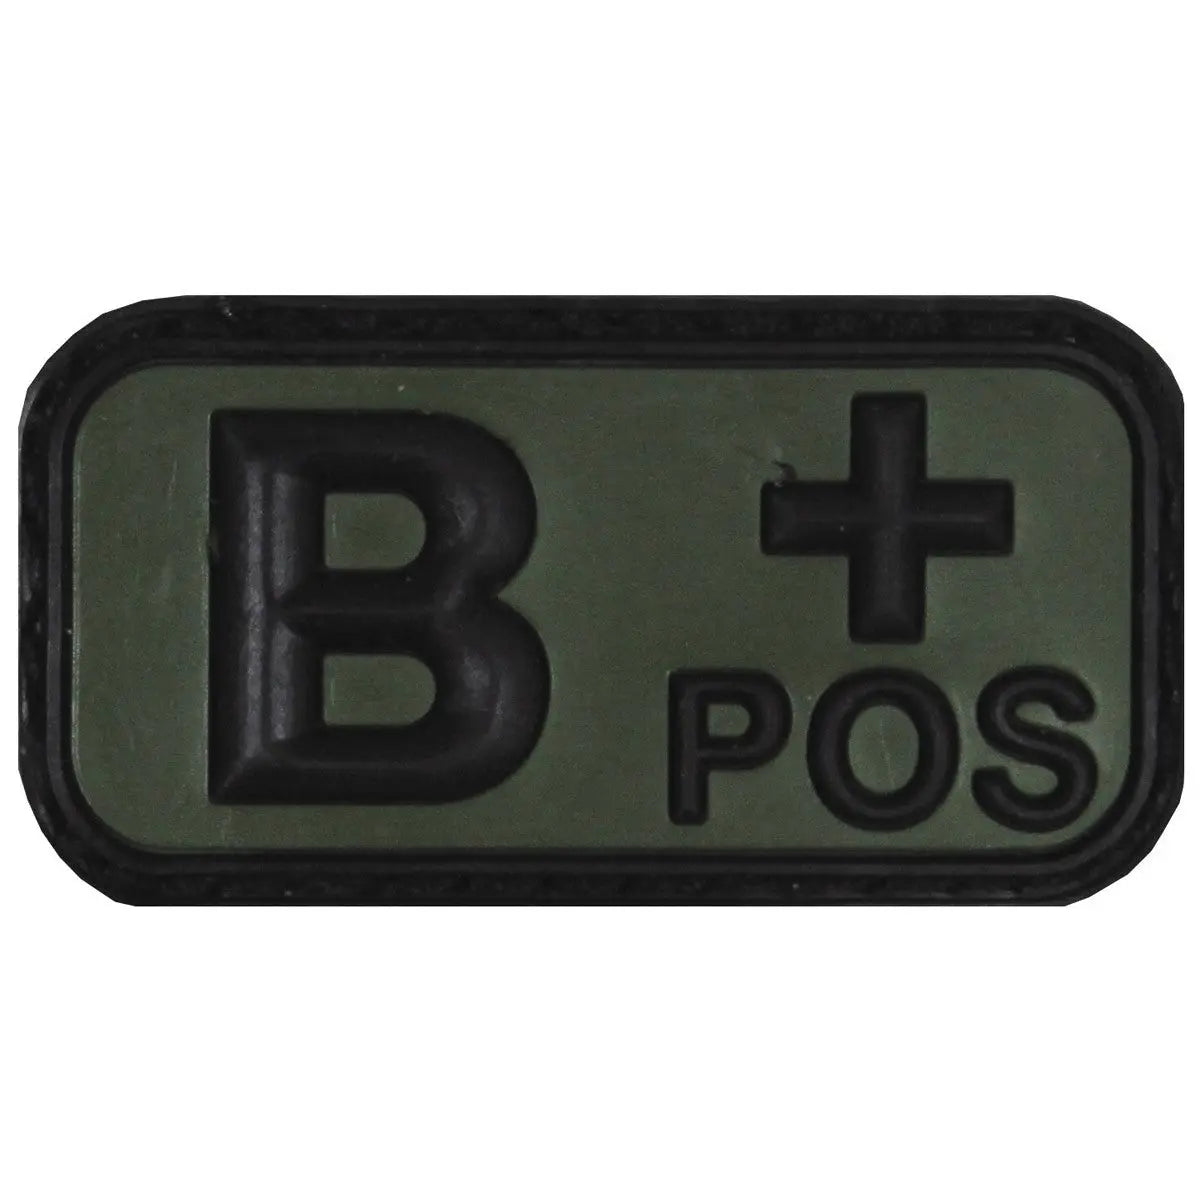 Velcro Patch, black-OD green, blood group "B POS", 3D NSO Gear